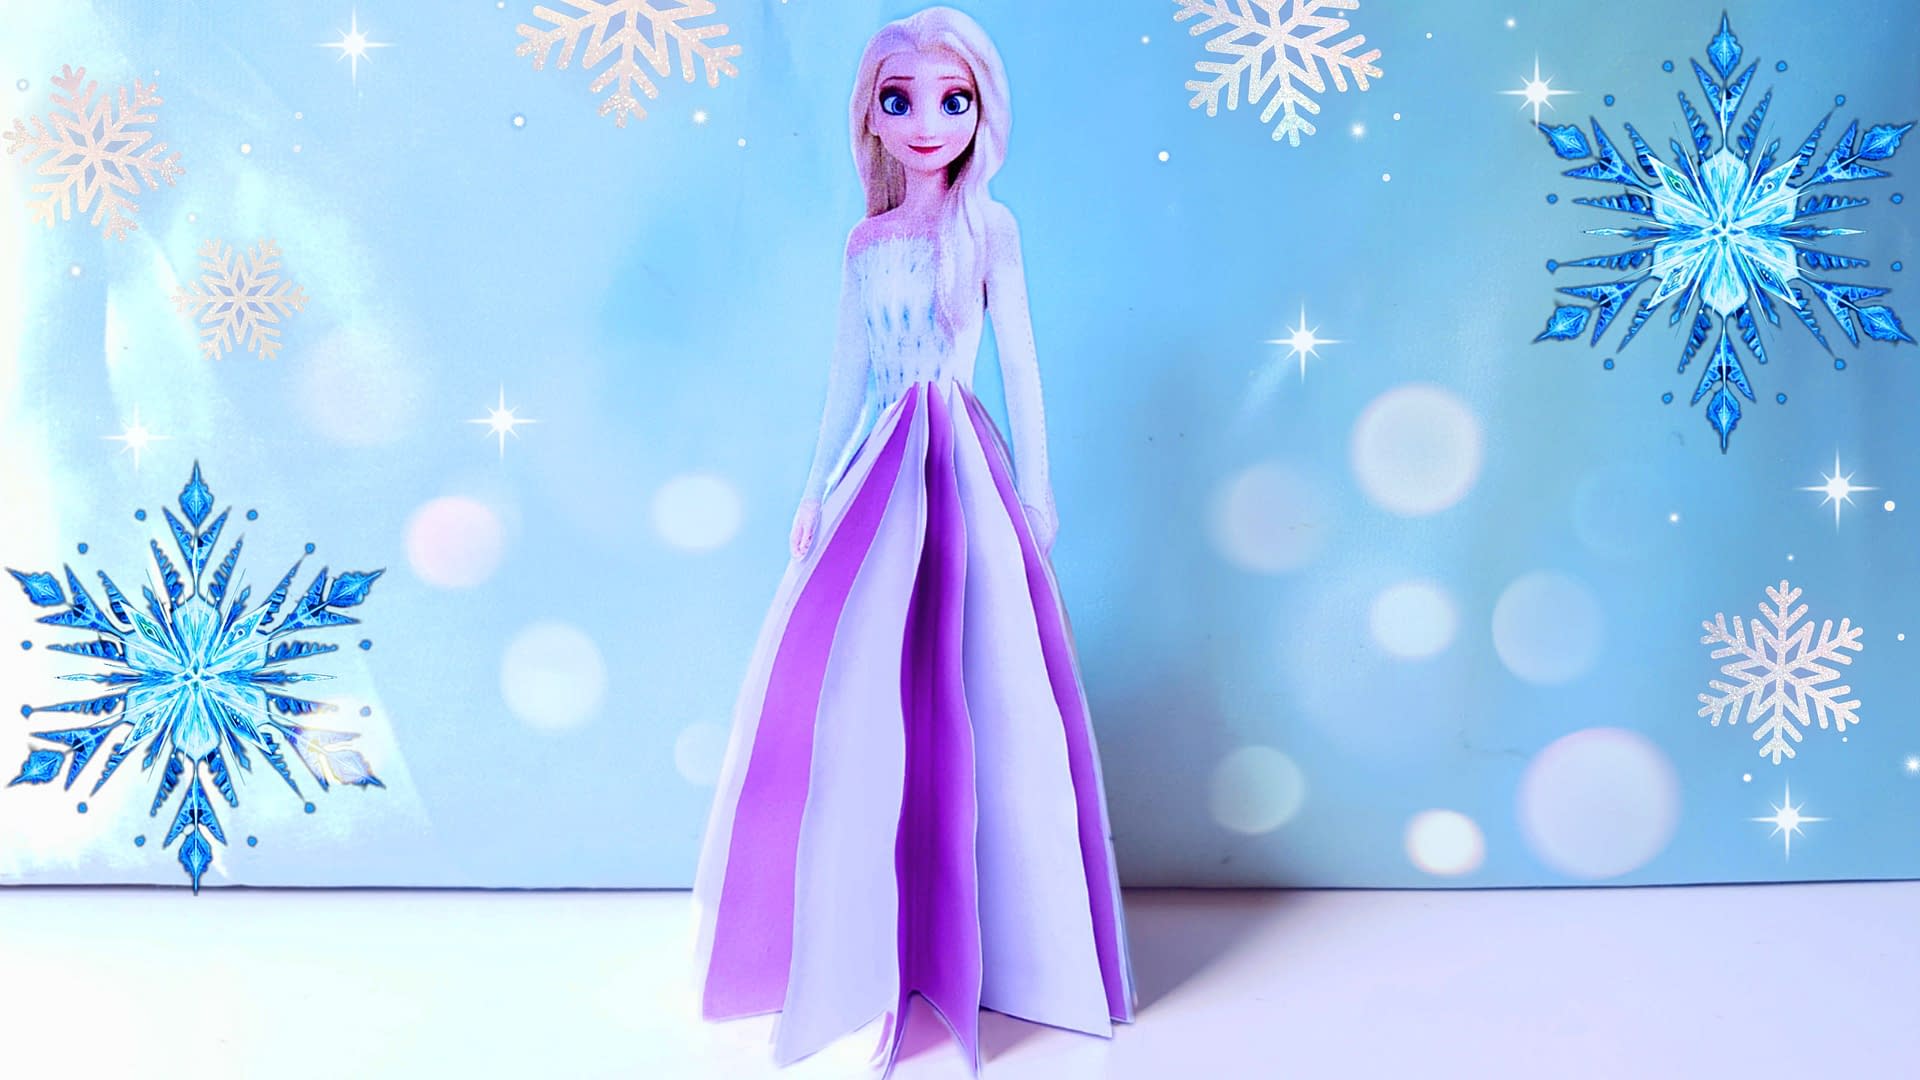 DIY Elsa Doll from Frozen 2| Easy Frozen paper craft| Make your own 2D Elsa  Doll - The Toddler Transitions